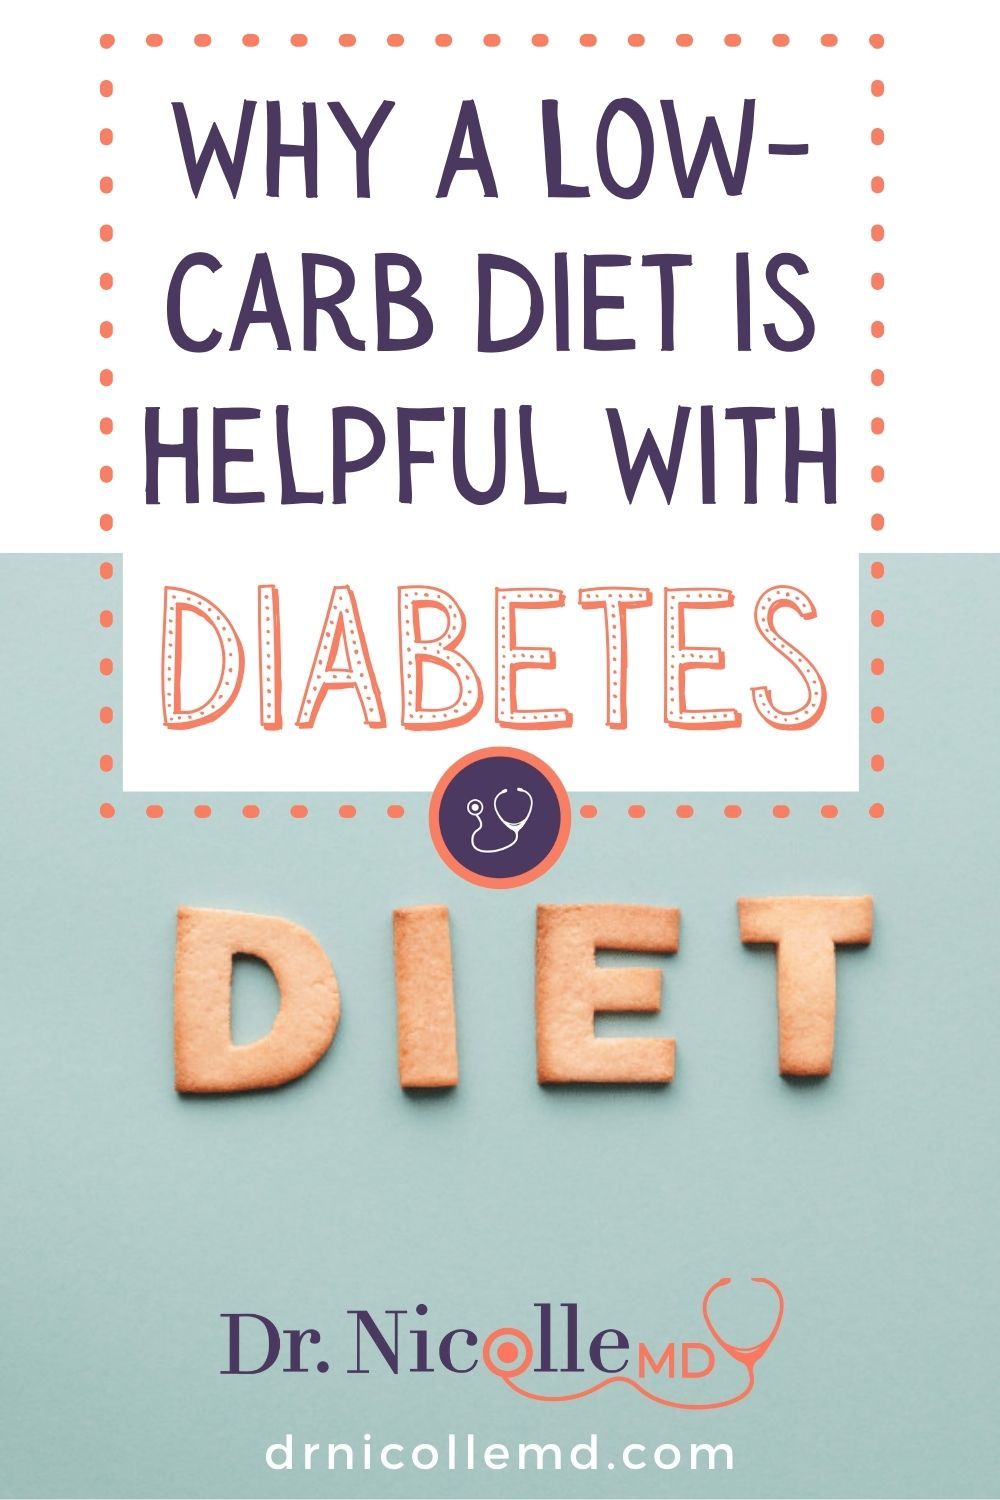 Why a Low-Carb Diet is Helpful With Diabetes